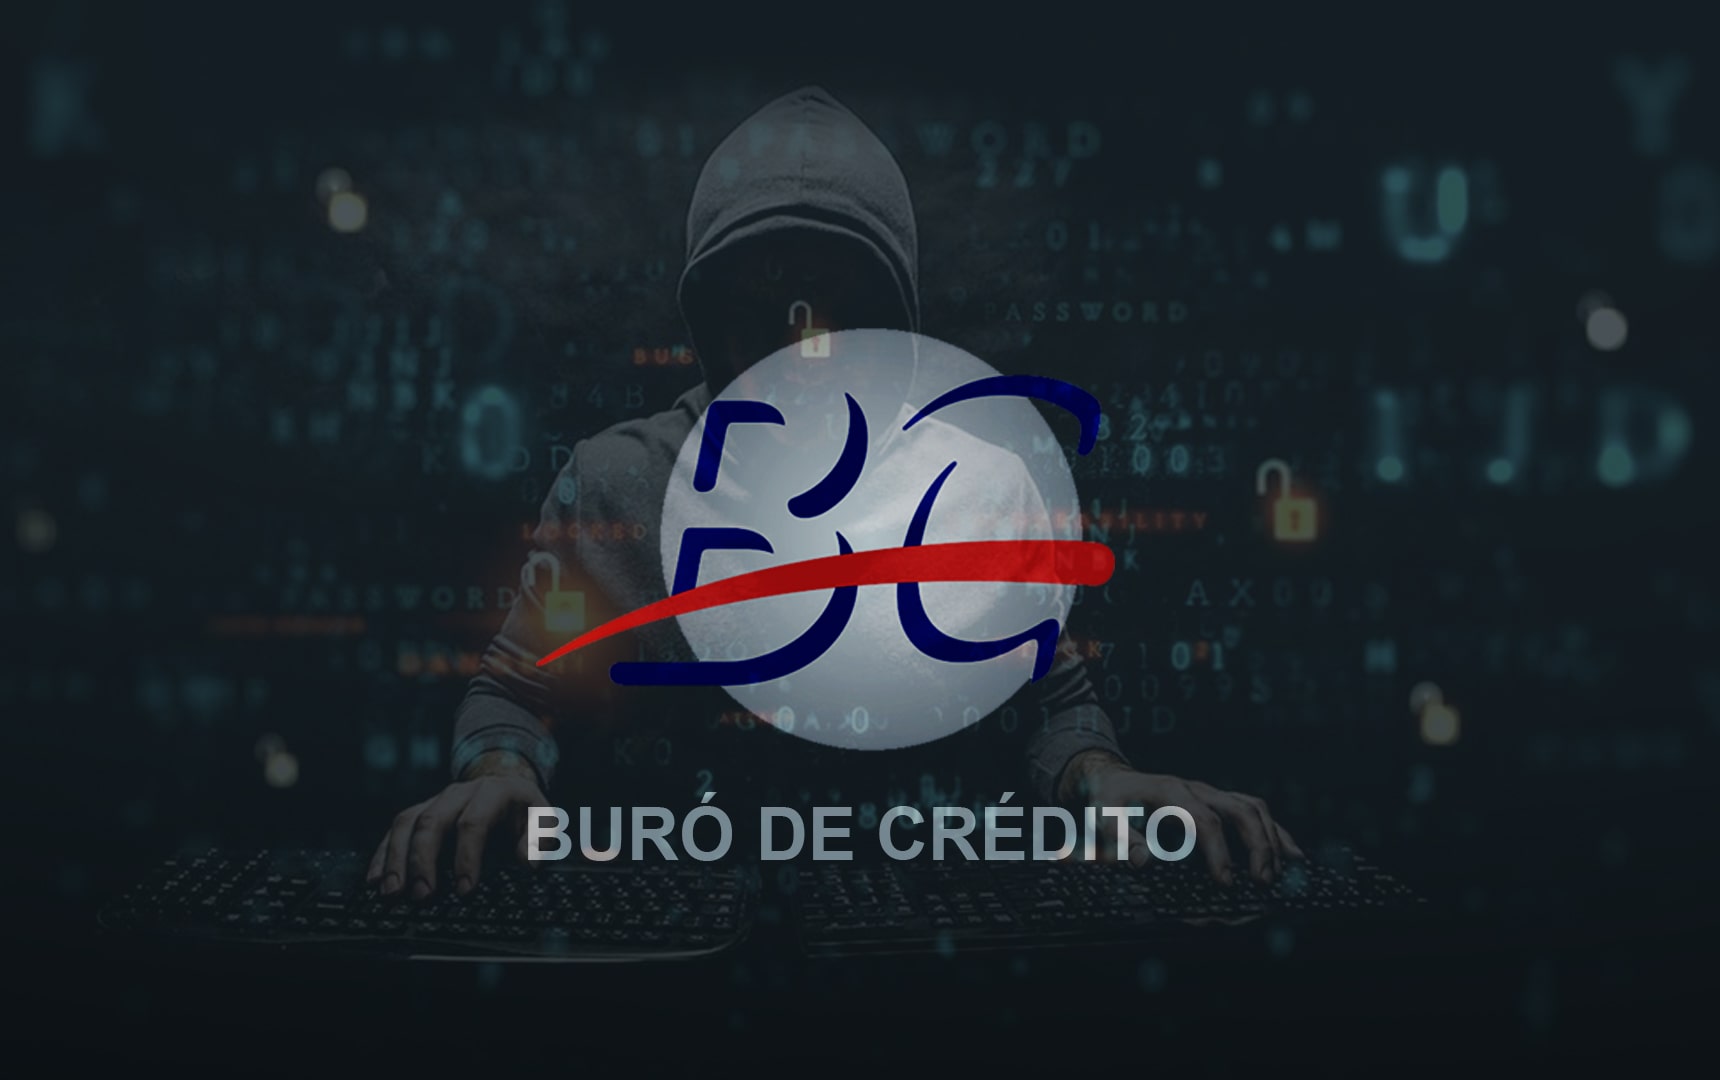 CNBV confirms hacking of the Credit Bureau